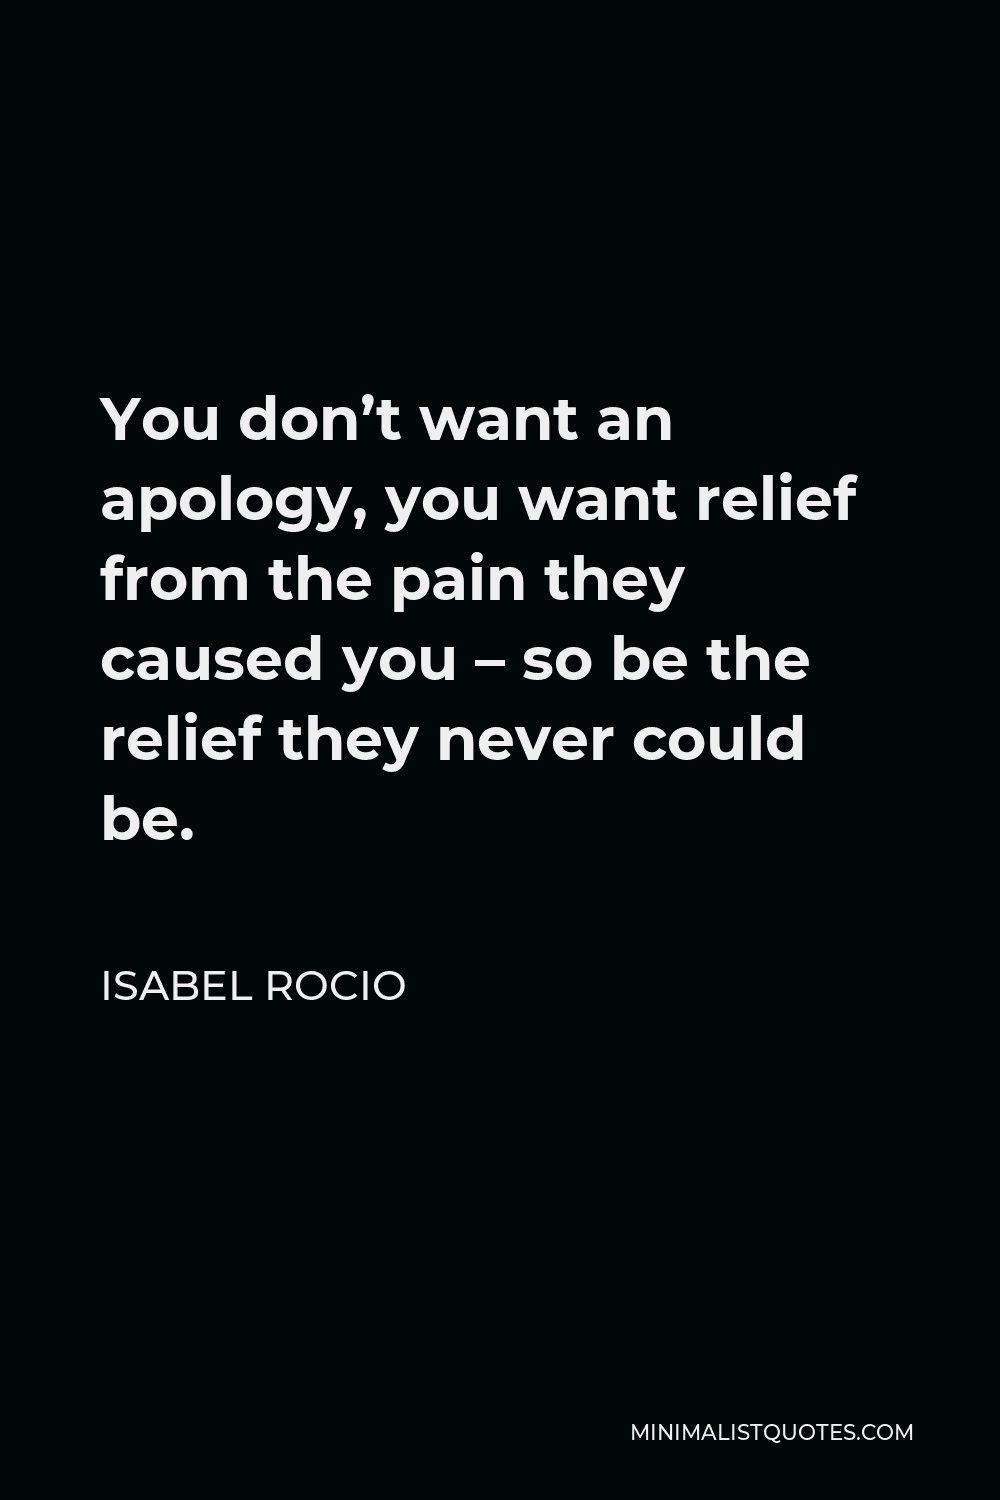 Isabel Rocio Quote - You don’t want an apology, you want relief from the pain they caused you – so be the relief they never could be.